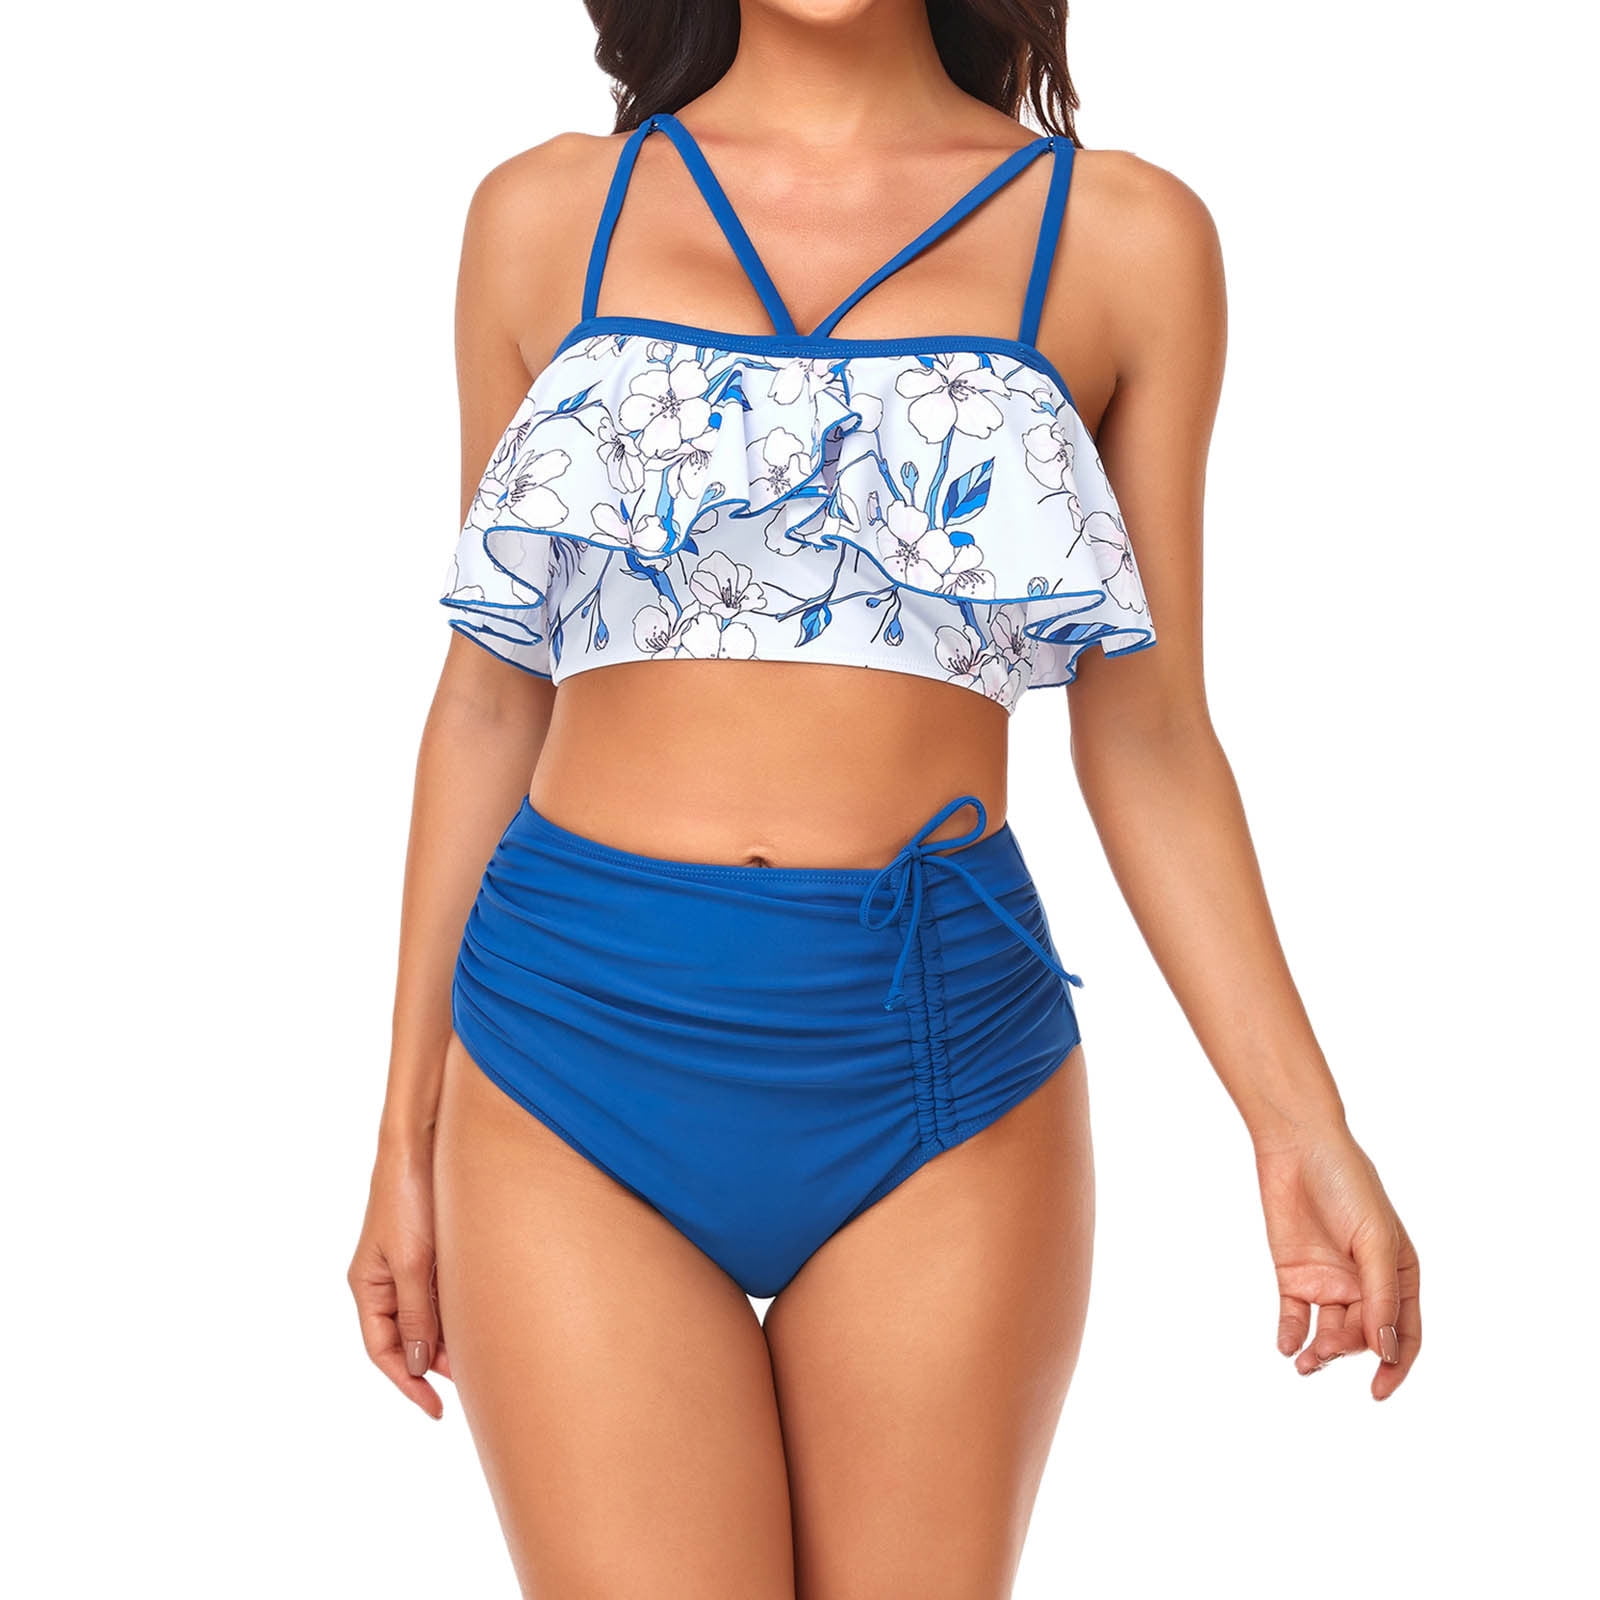 QUYUON Woman Bikini Swimsuit Two Piece Push up Bathing Suit Athletic  Swimsuits for Women Beach Swim Dress Cheeky Swimsuits Style-981 Modest  Athletic Swimming Suit Blue XXL 